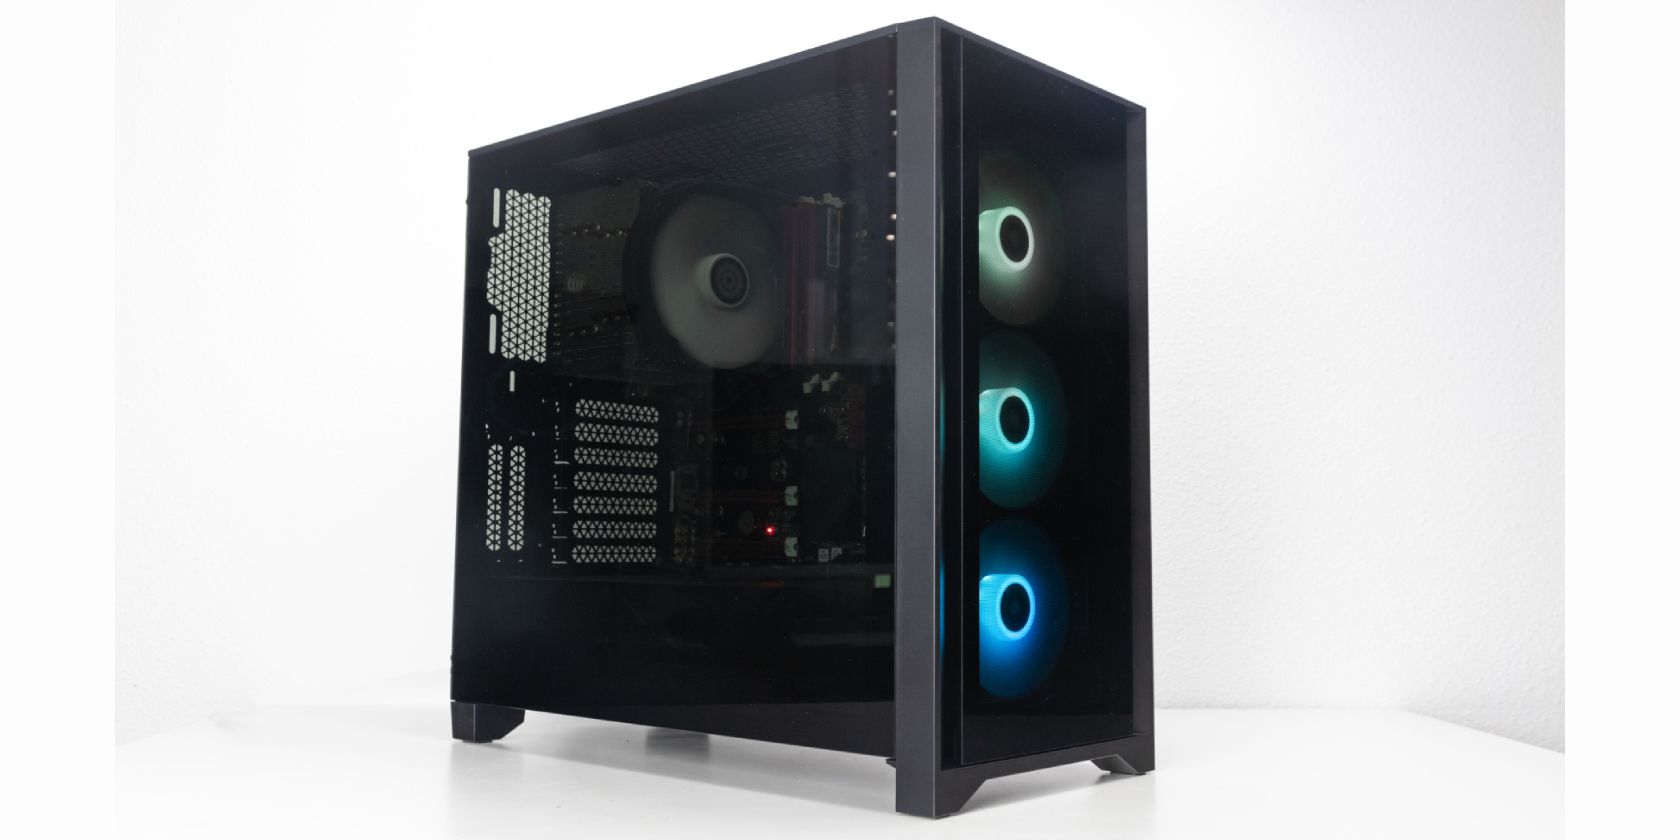 Black gaming PC tower with RGB lights